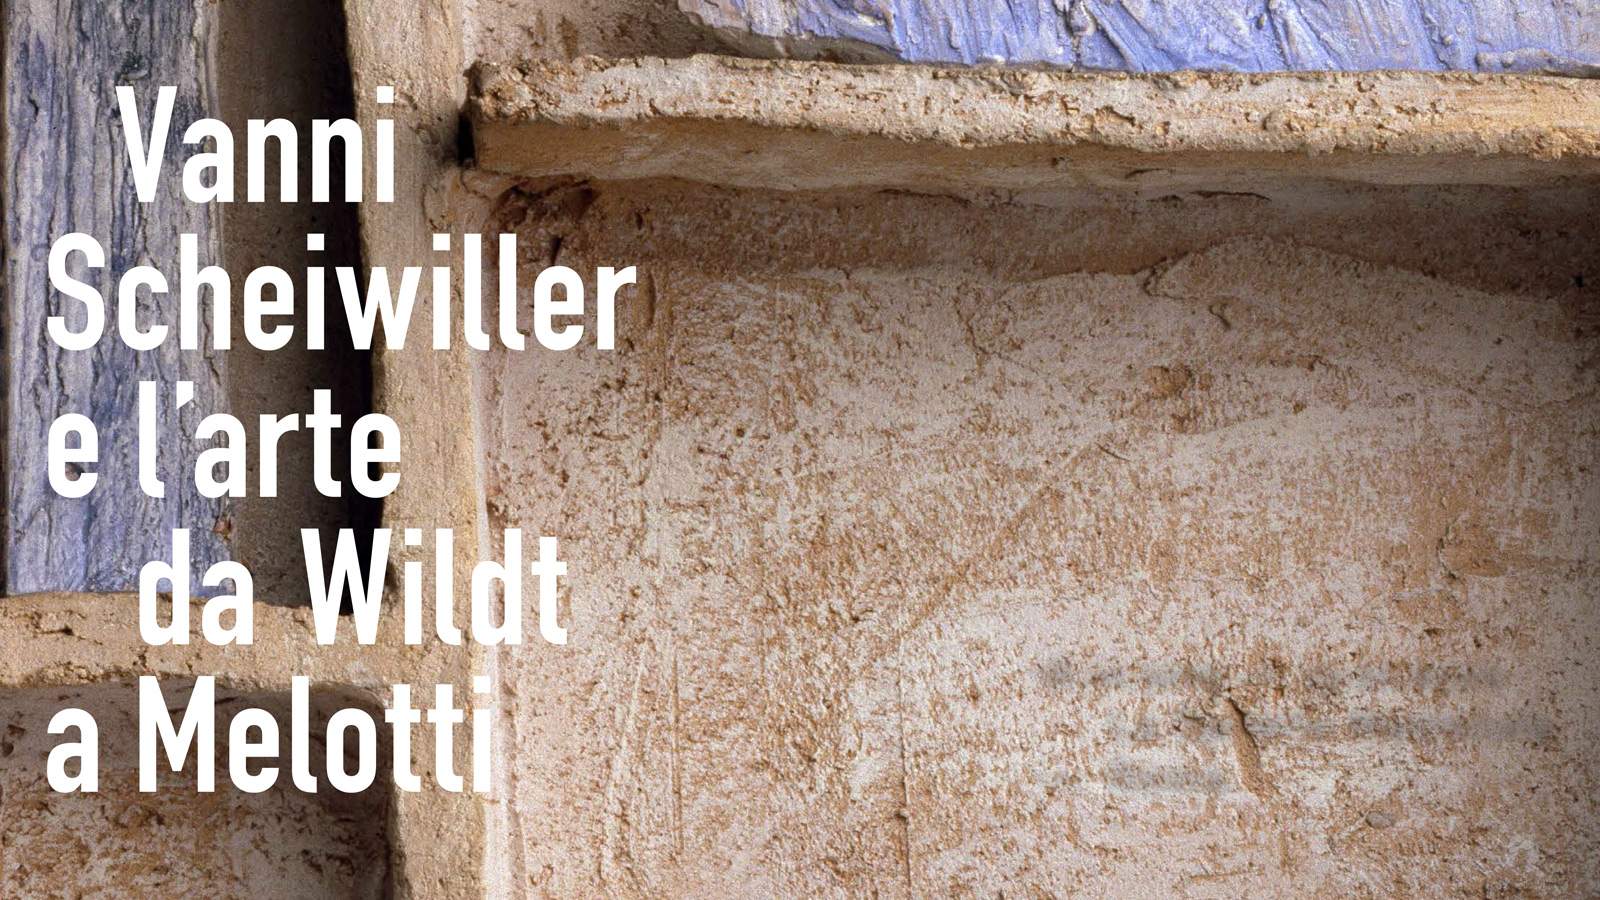 An exhibition in Rome dedicated to Vanni Scheiwiller, the journalist and art critic who was Adolfo Wildt's grandson